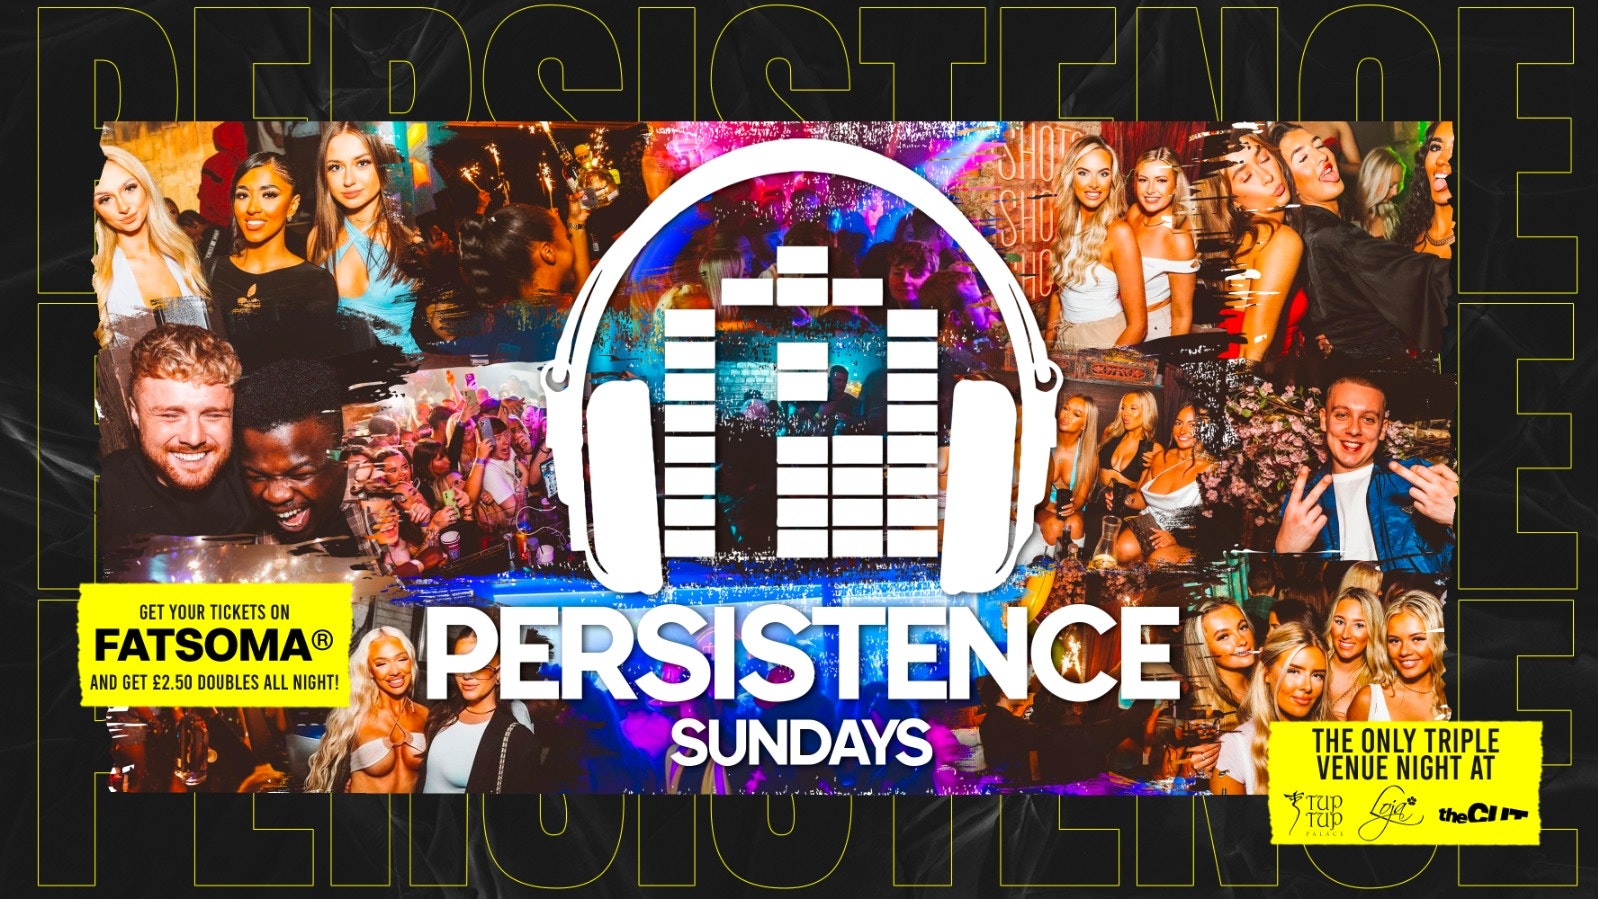 PERSISTENCE | £2.50 DOUBLES WITH A TICKET! | TUP TUP PALACE, LOJA & THE CUT | 12th FEBRUARY